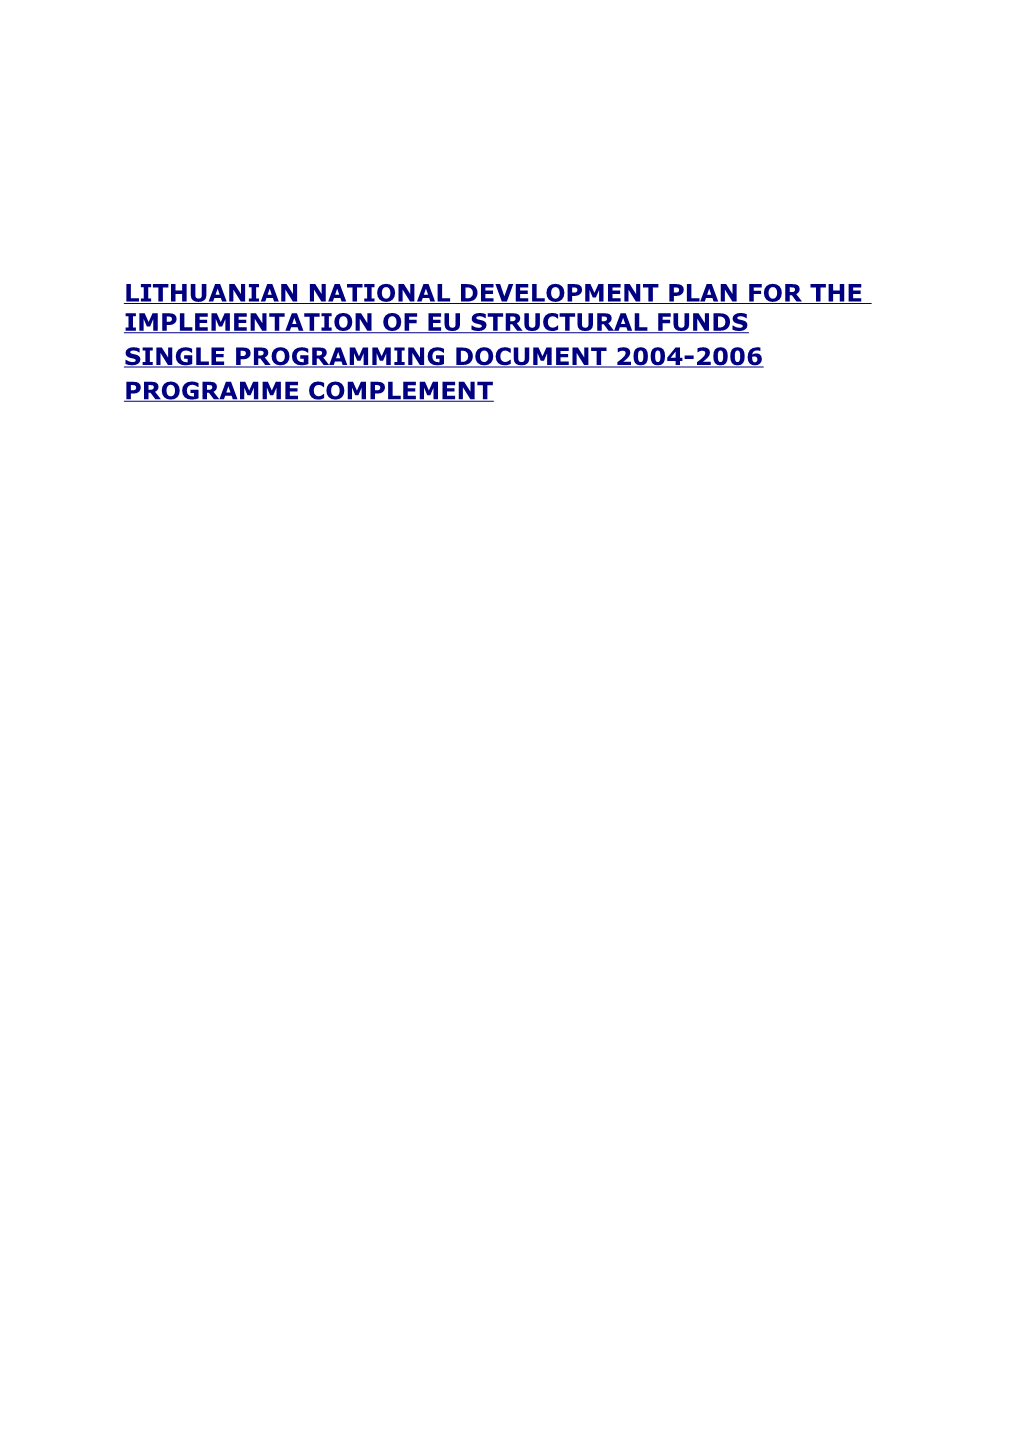 Lithuanian National Development Plan for the Implementation of Eu Structural Funds